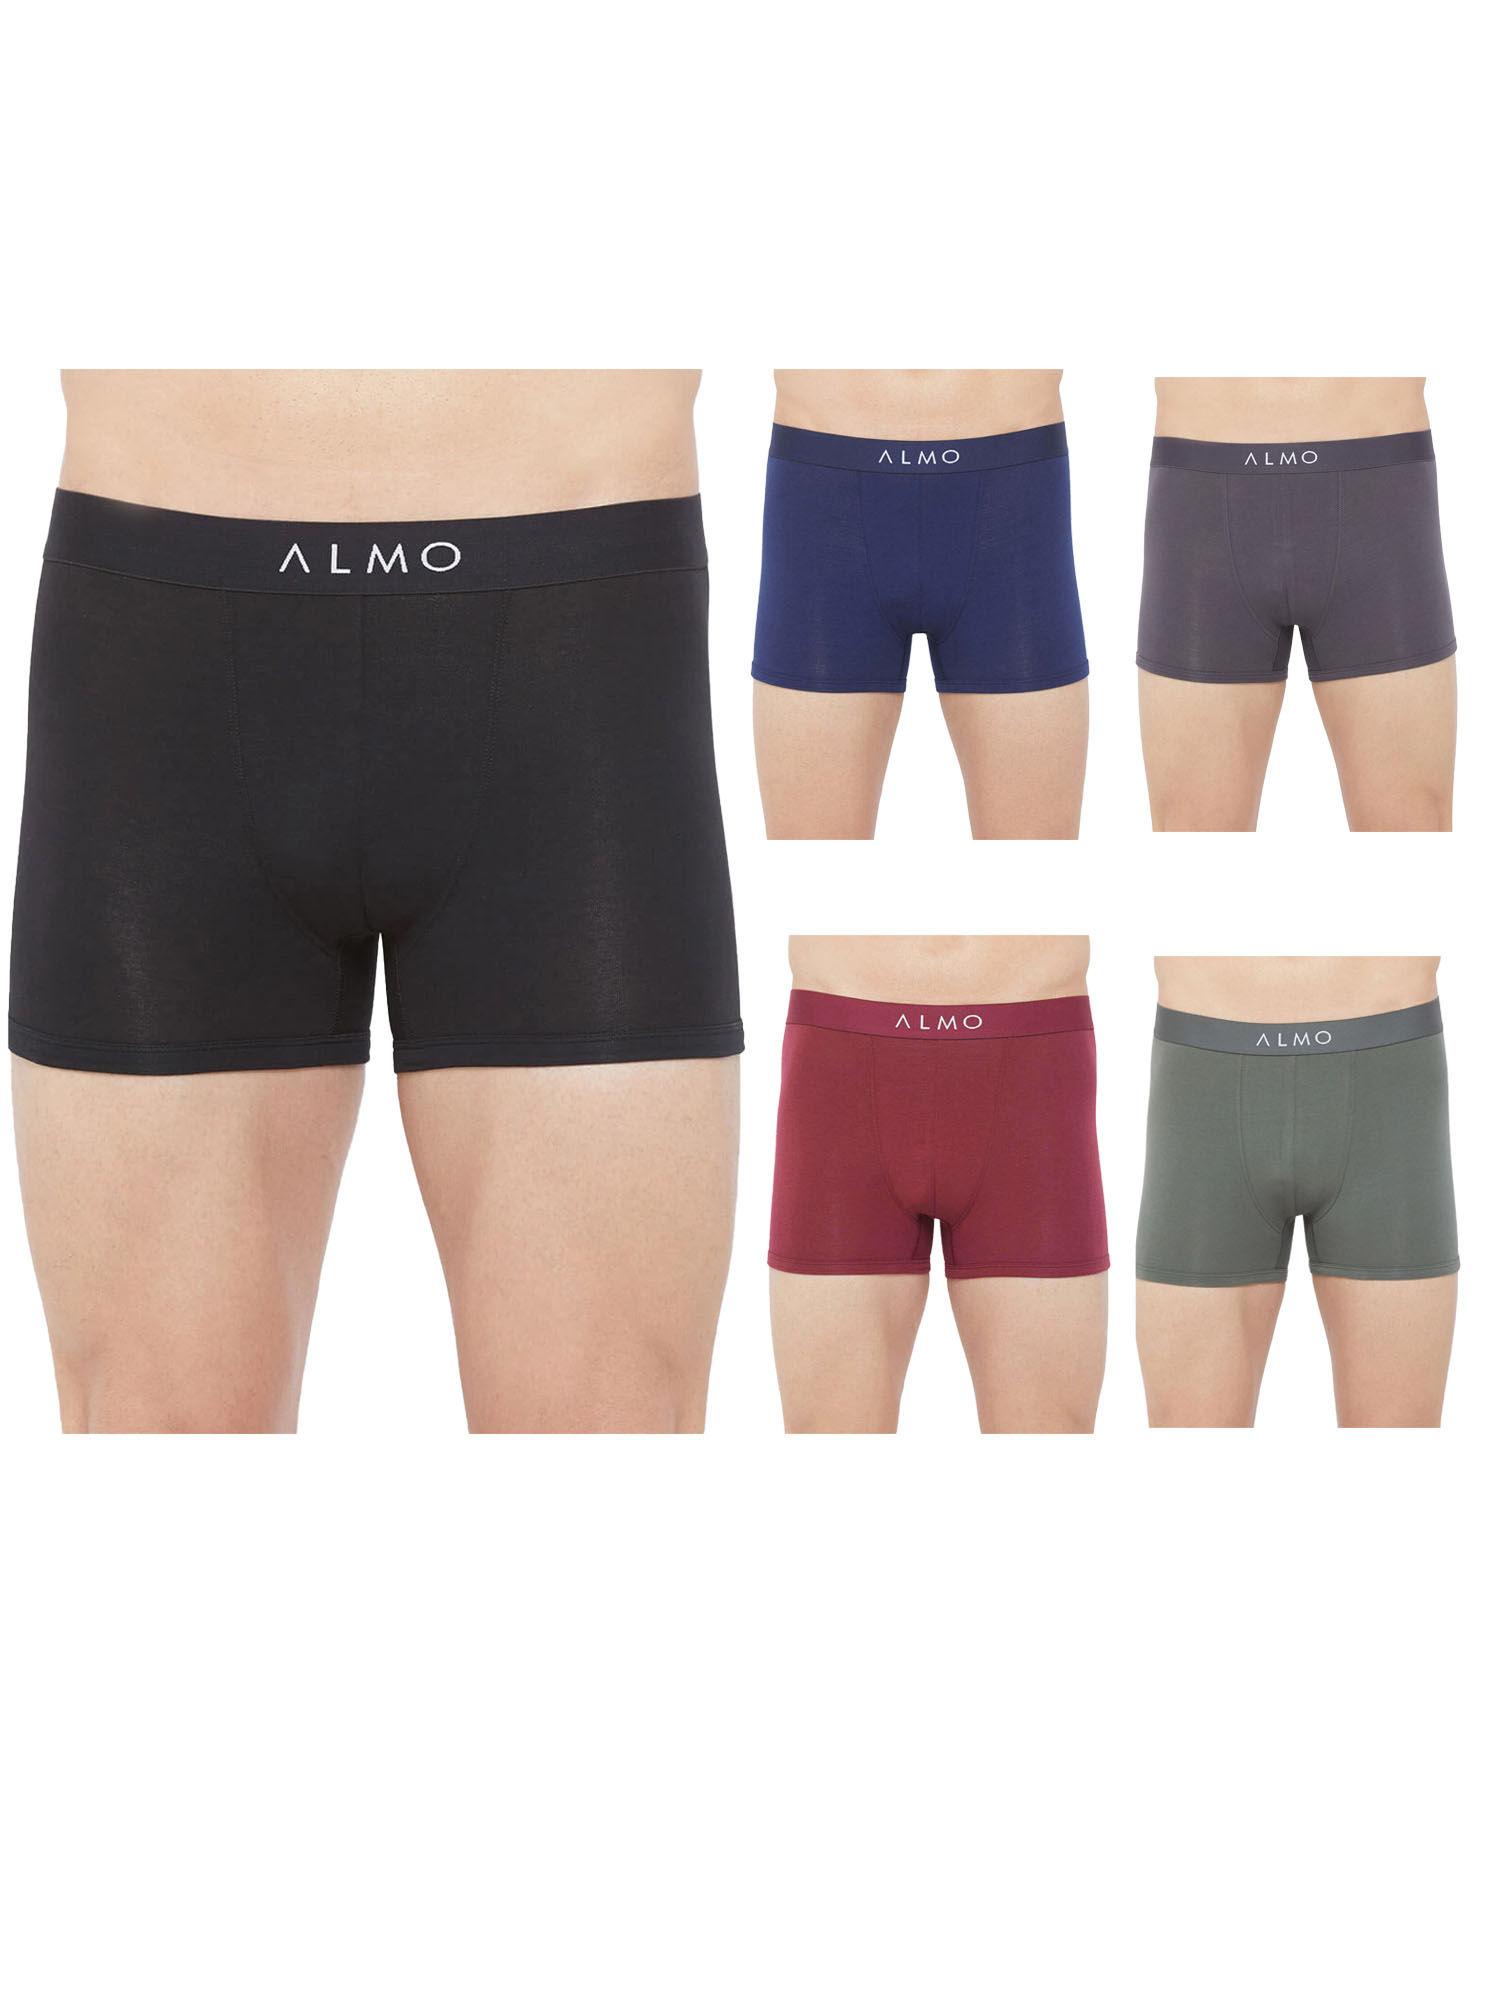 rico organic cotton trunk (pack of 5)